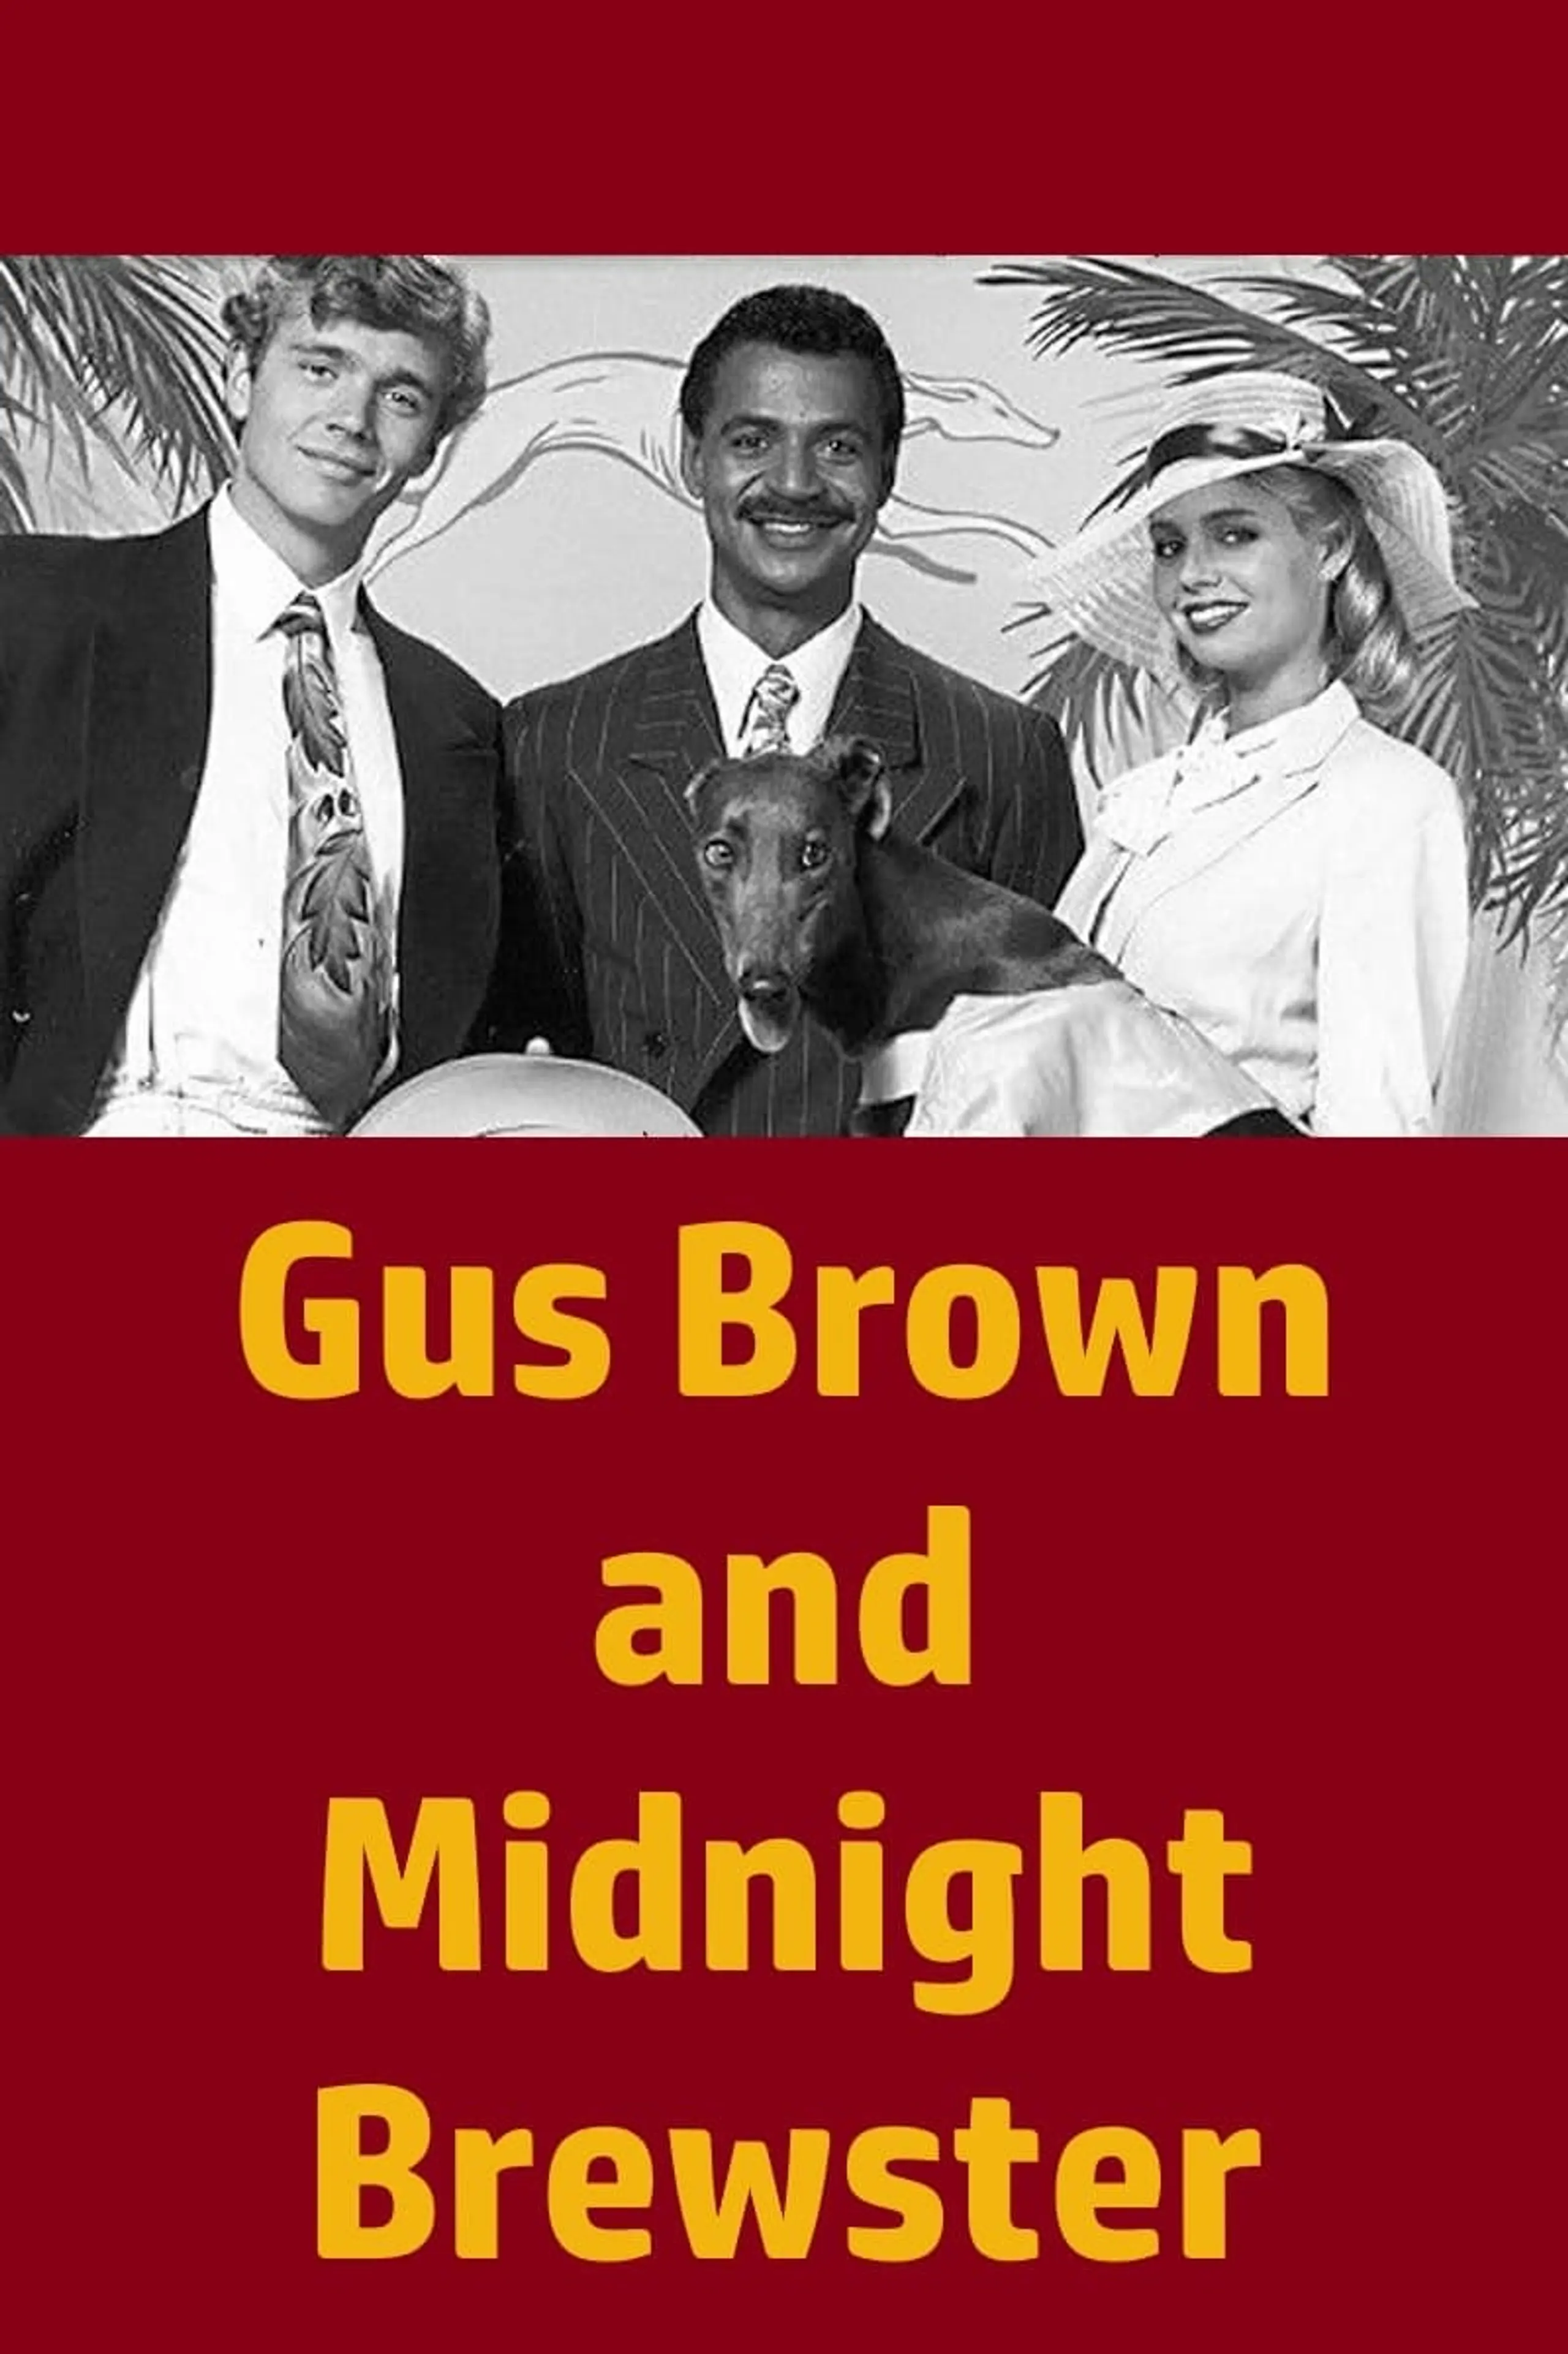 Gus Brown and Midnight Brewster